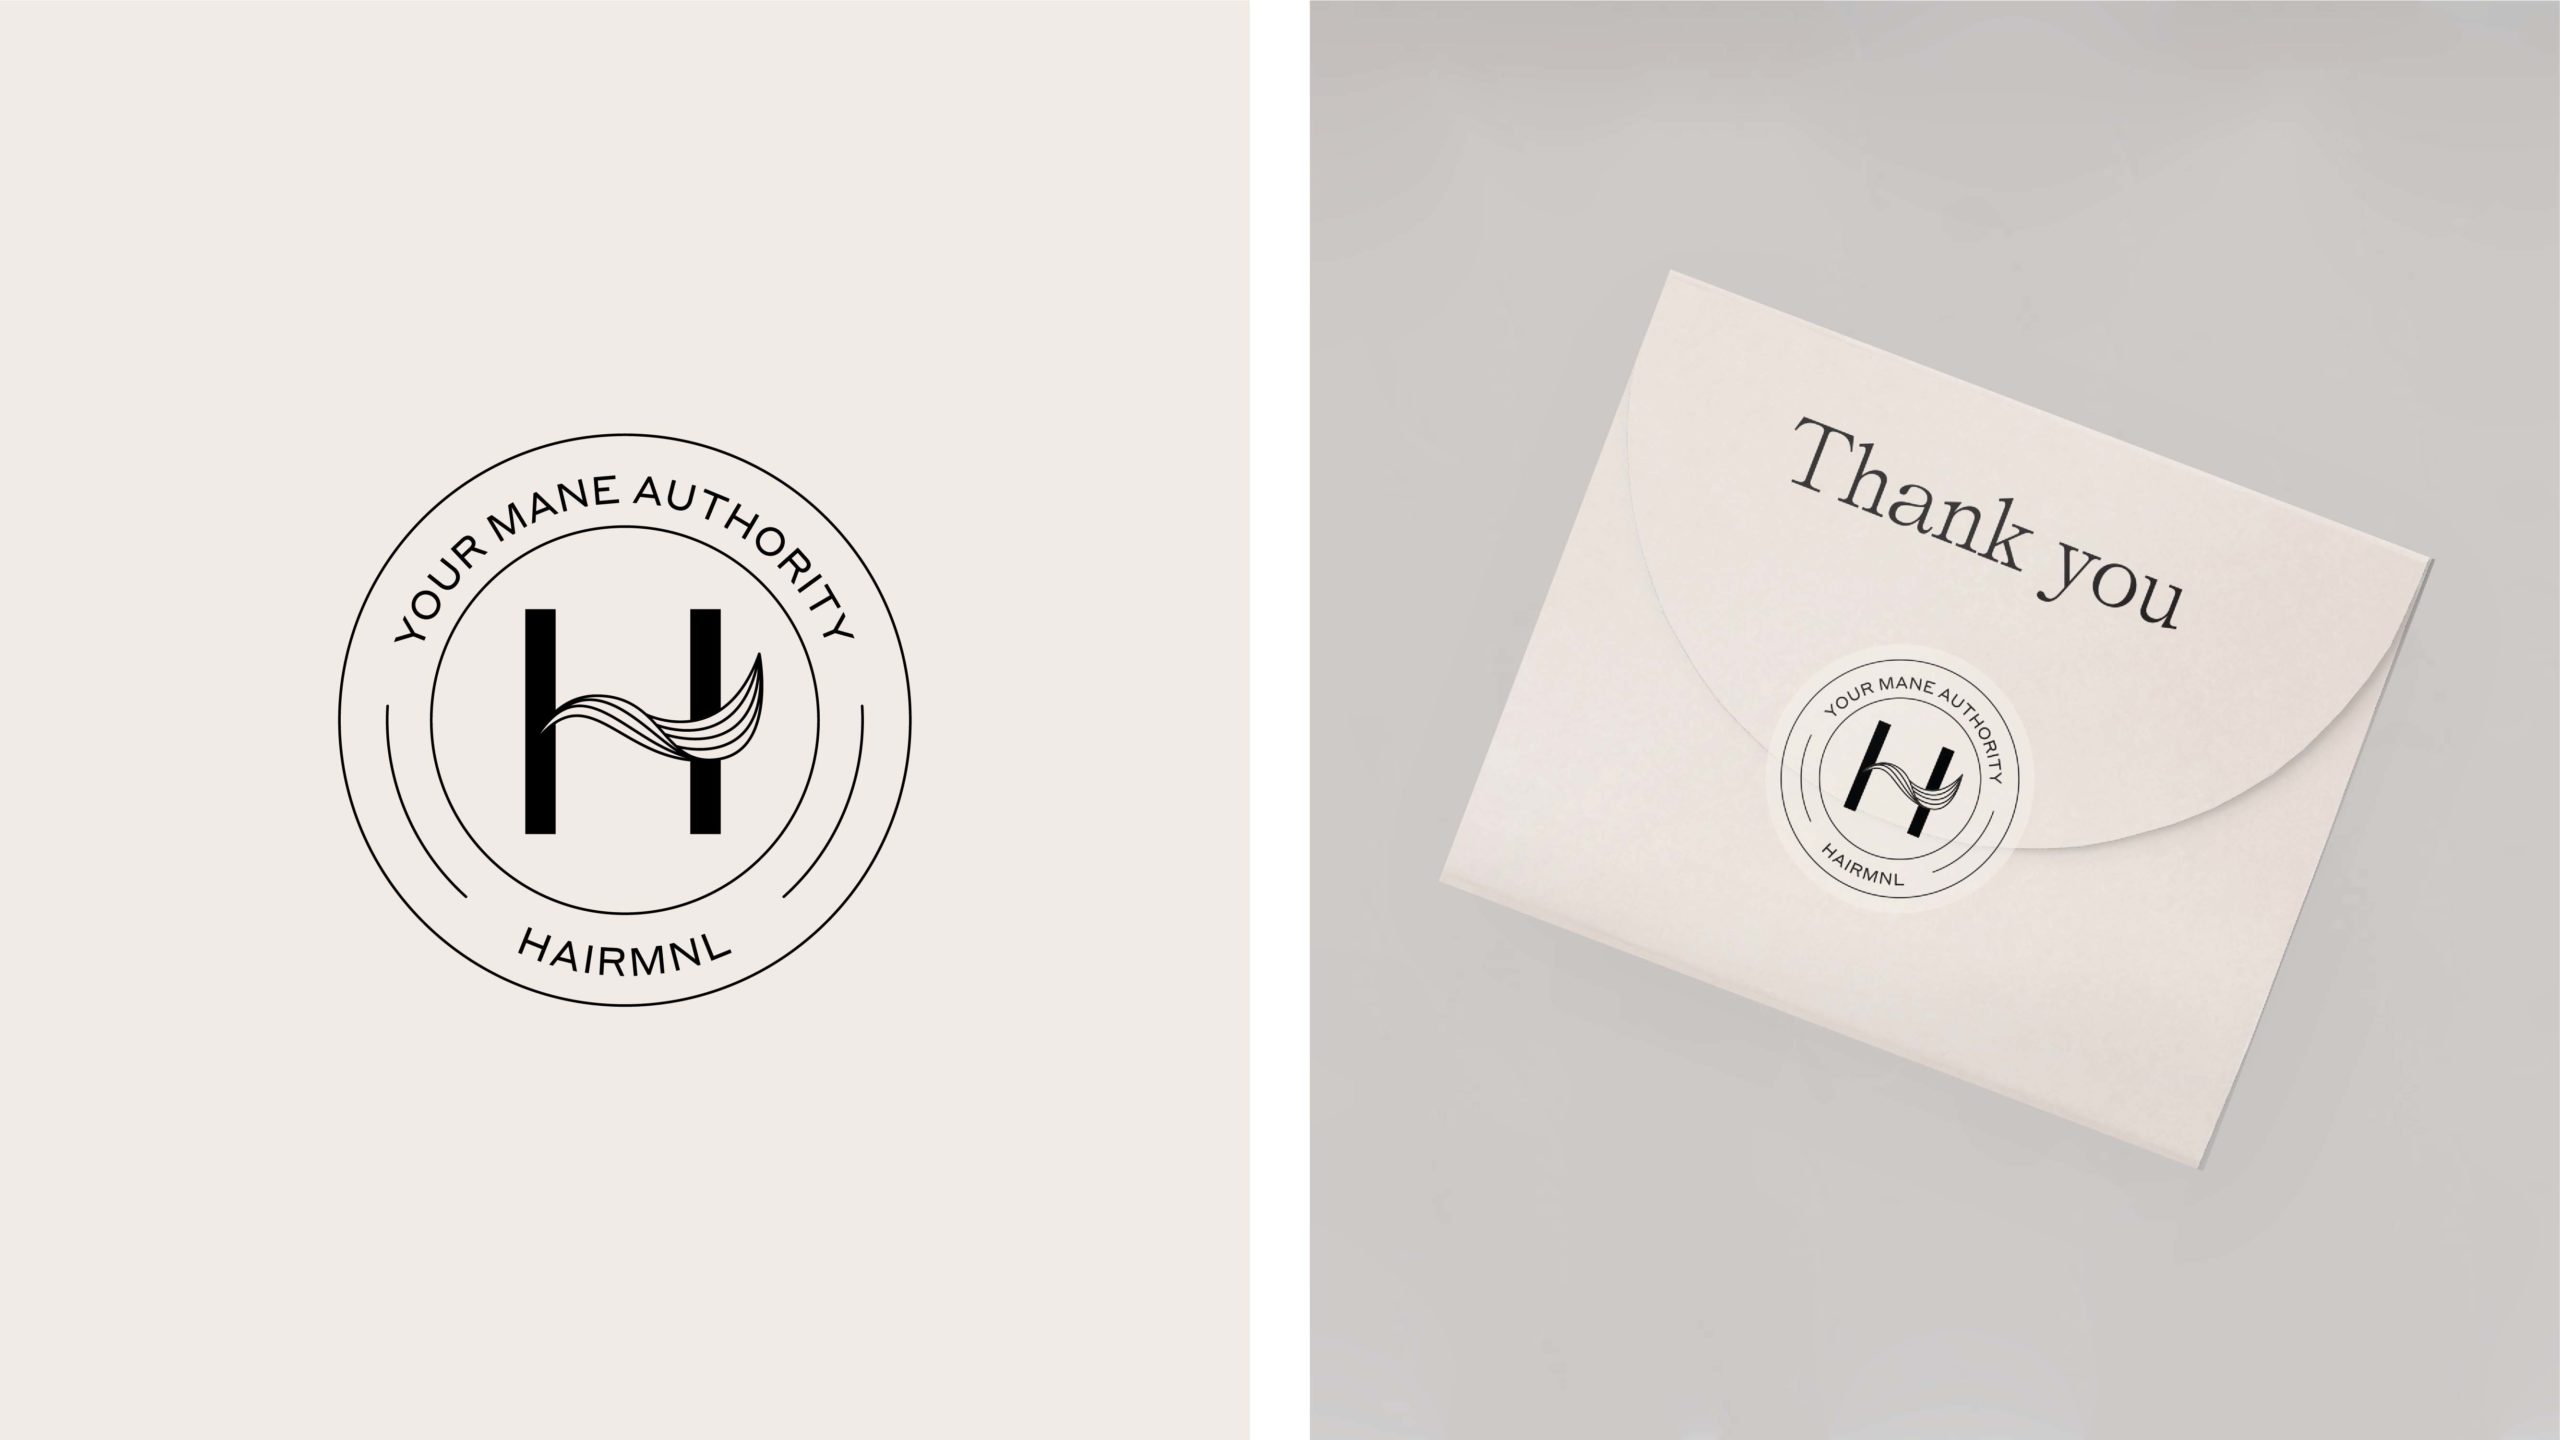 Icon, sticker, and envelope designed for professional haircare brand HairMNL